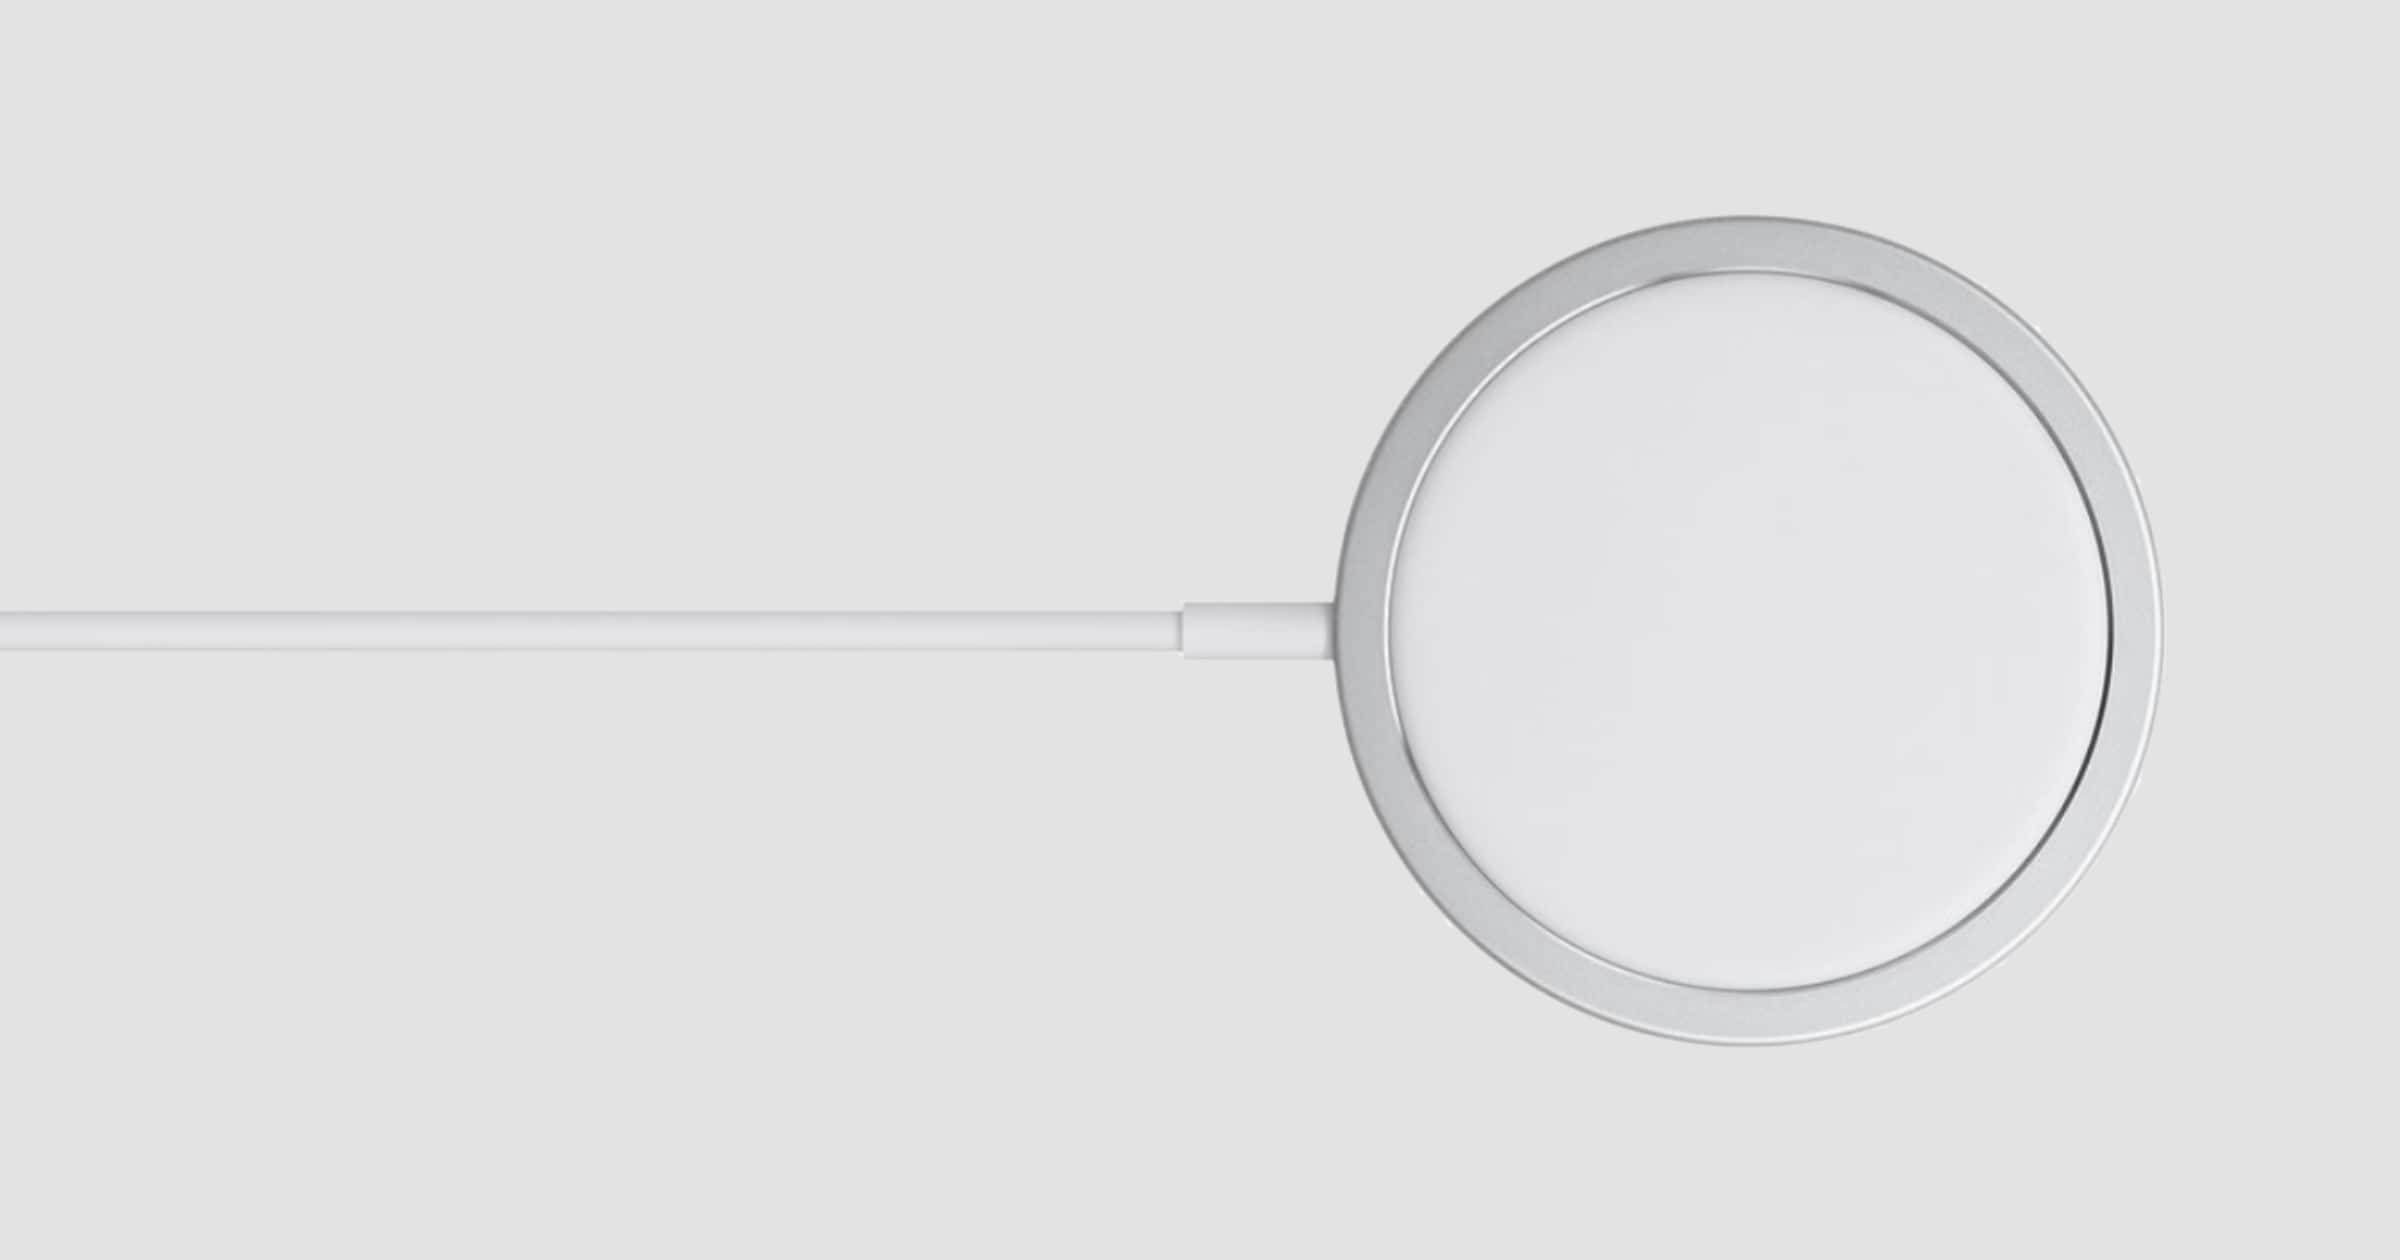 Reminder: You Can Charge AirPods With an iPhone 12 MagSafe Puck